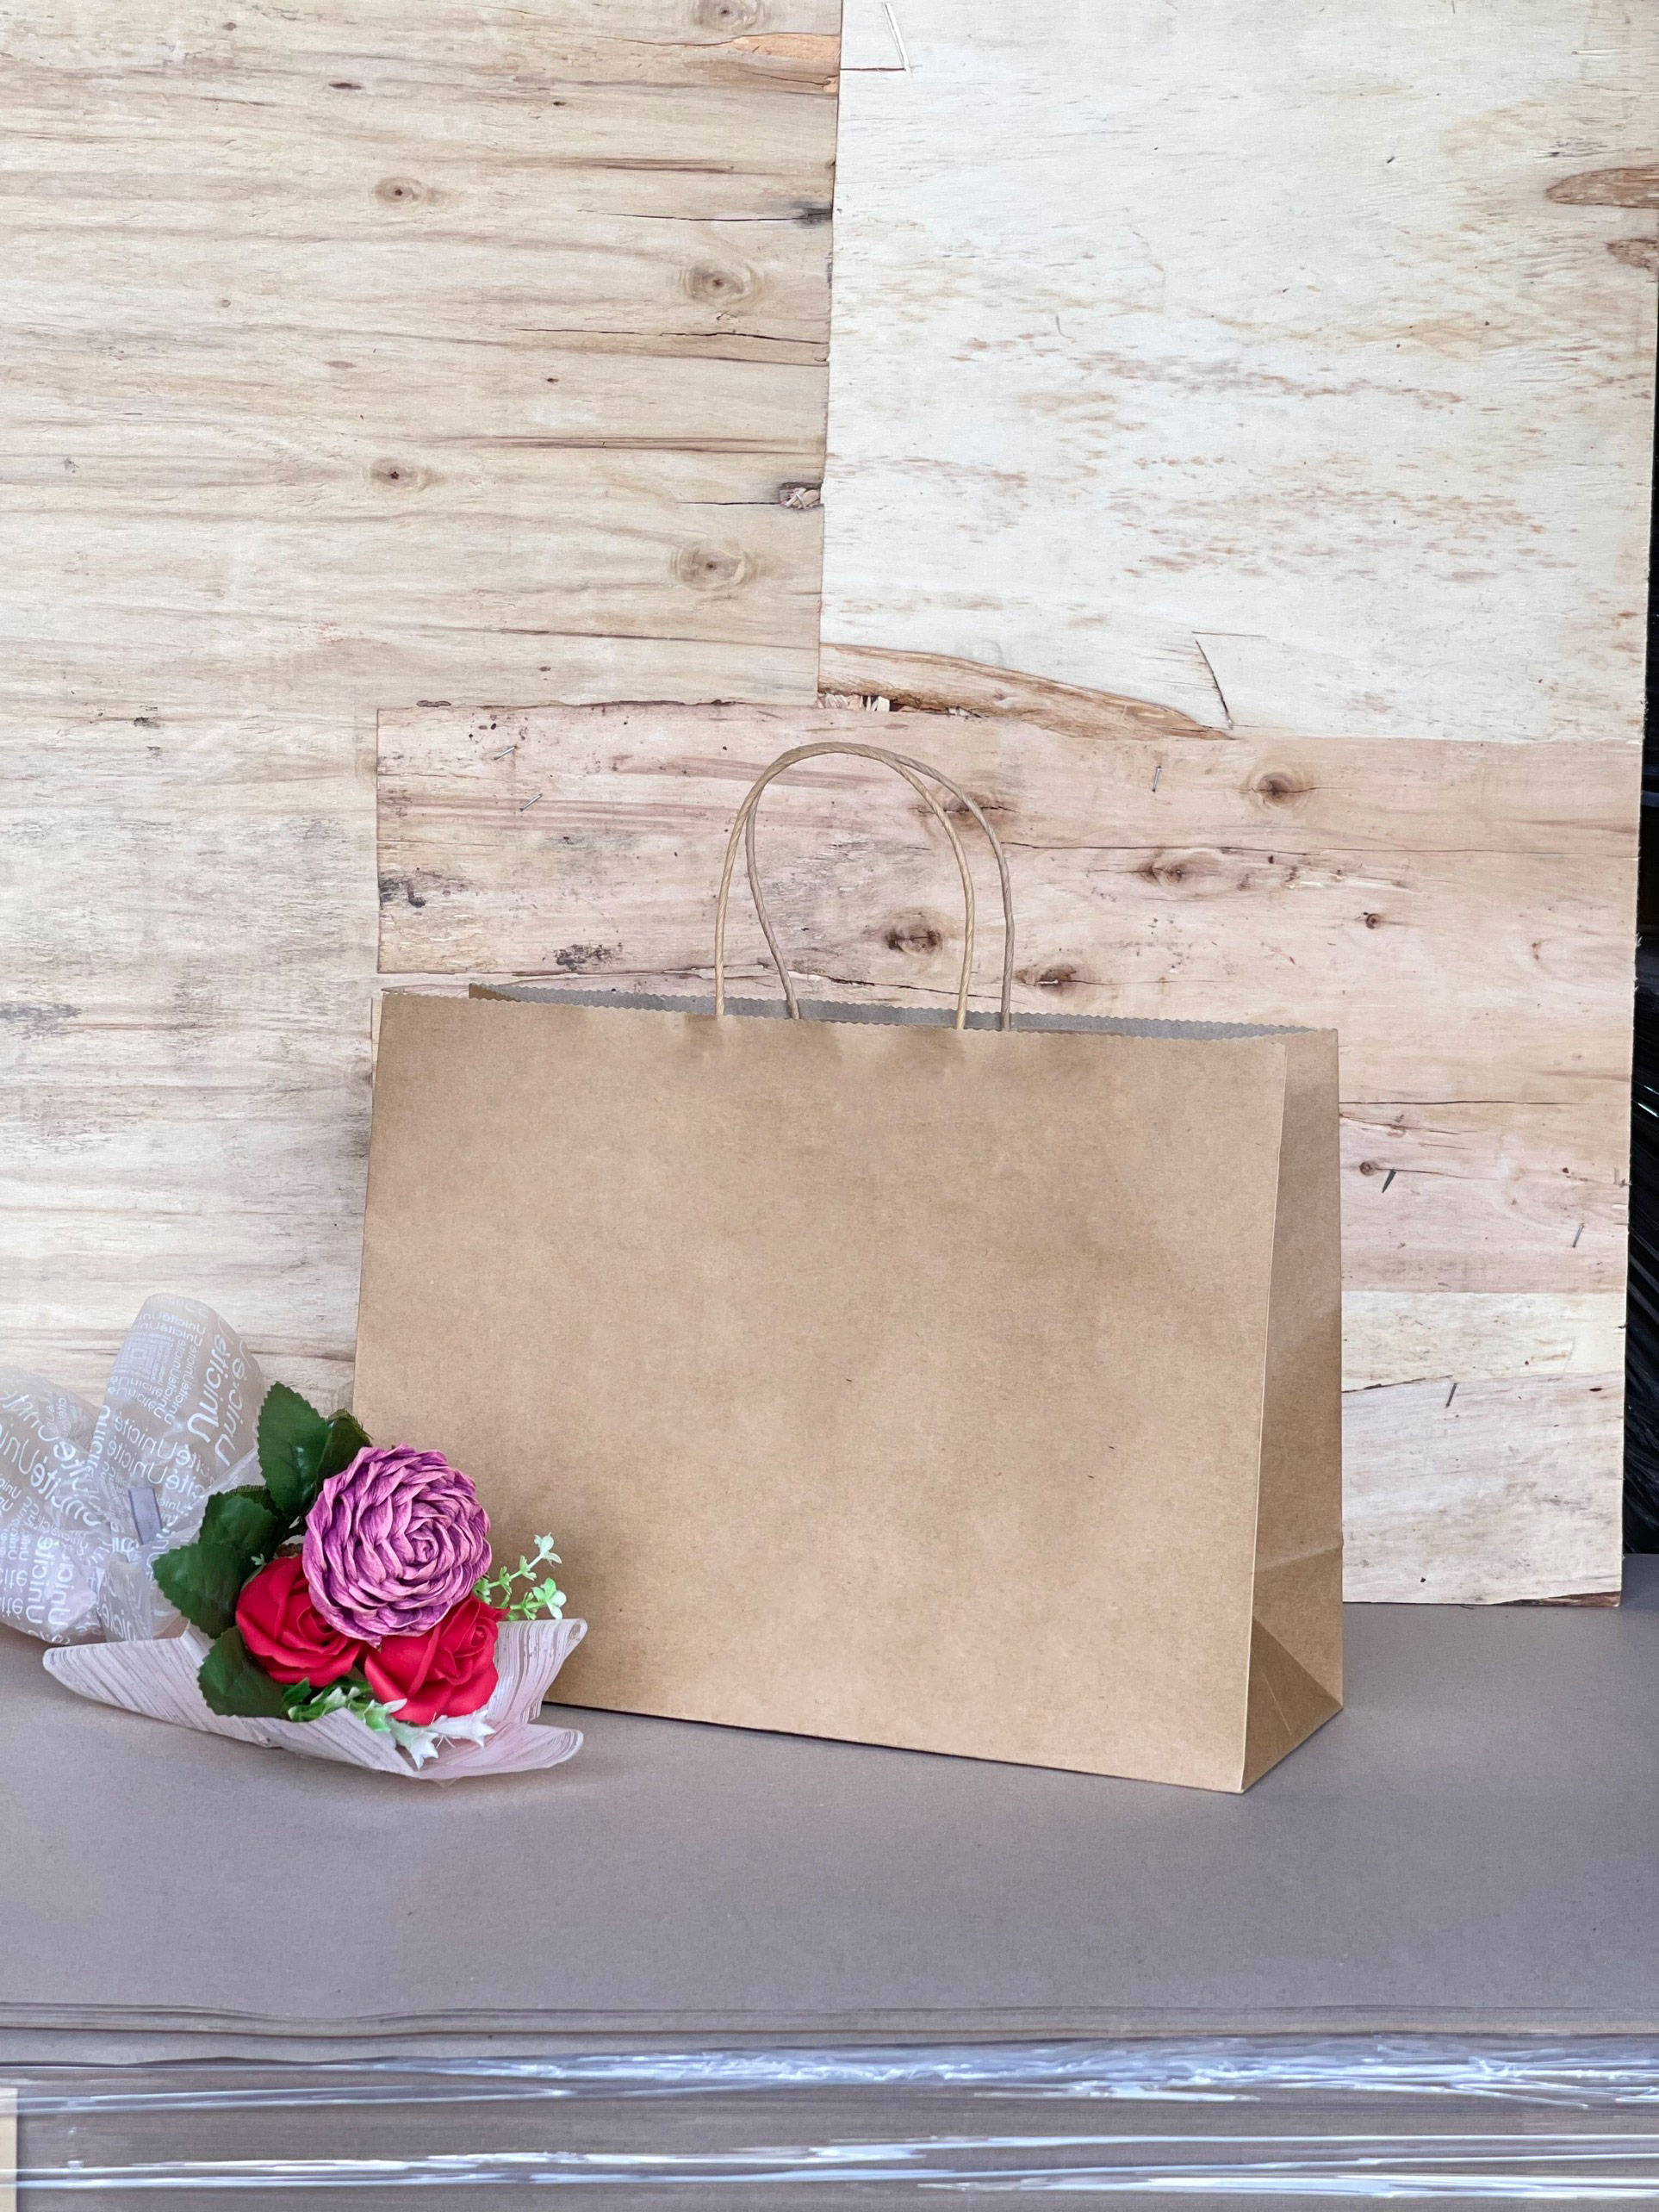 Kraft Paper Gift Bags With Handles Customized Size Eco-Friendly Shopping Accessories White Kraft Paper Vietnam Manufacturer